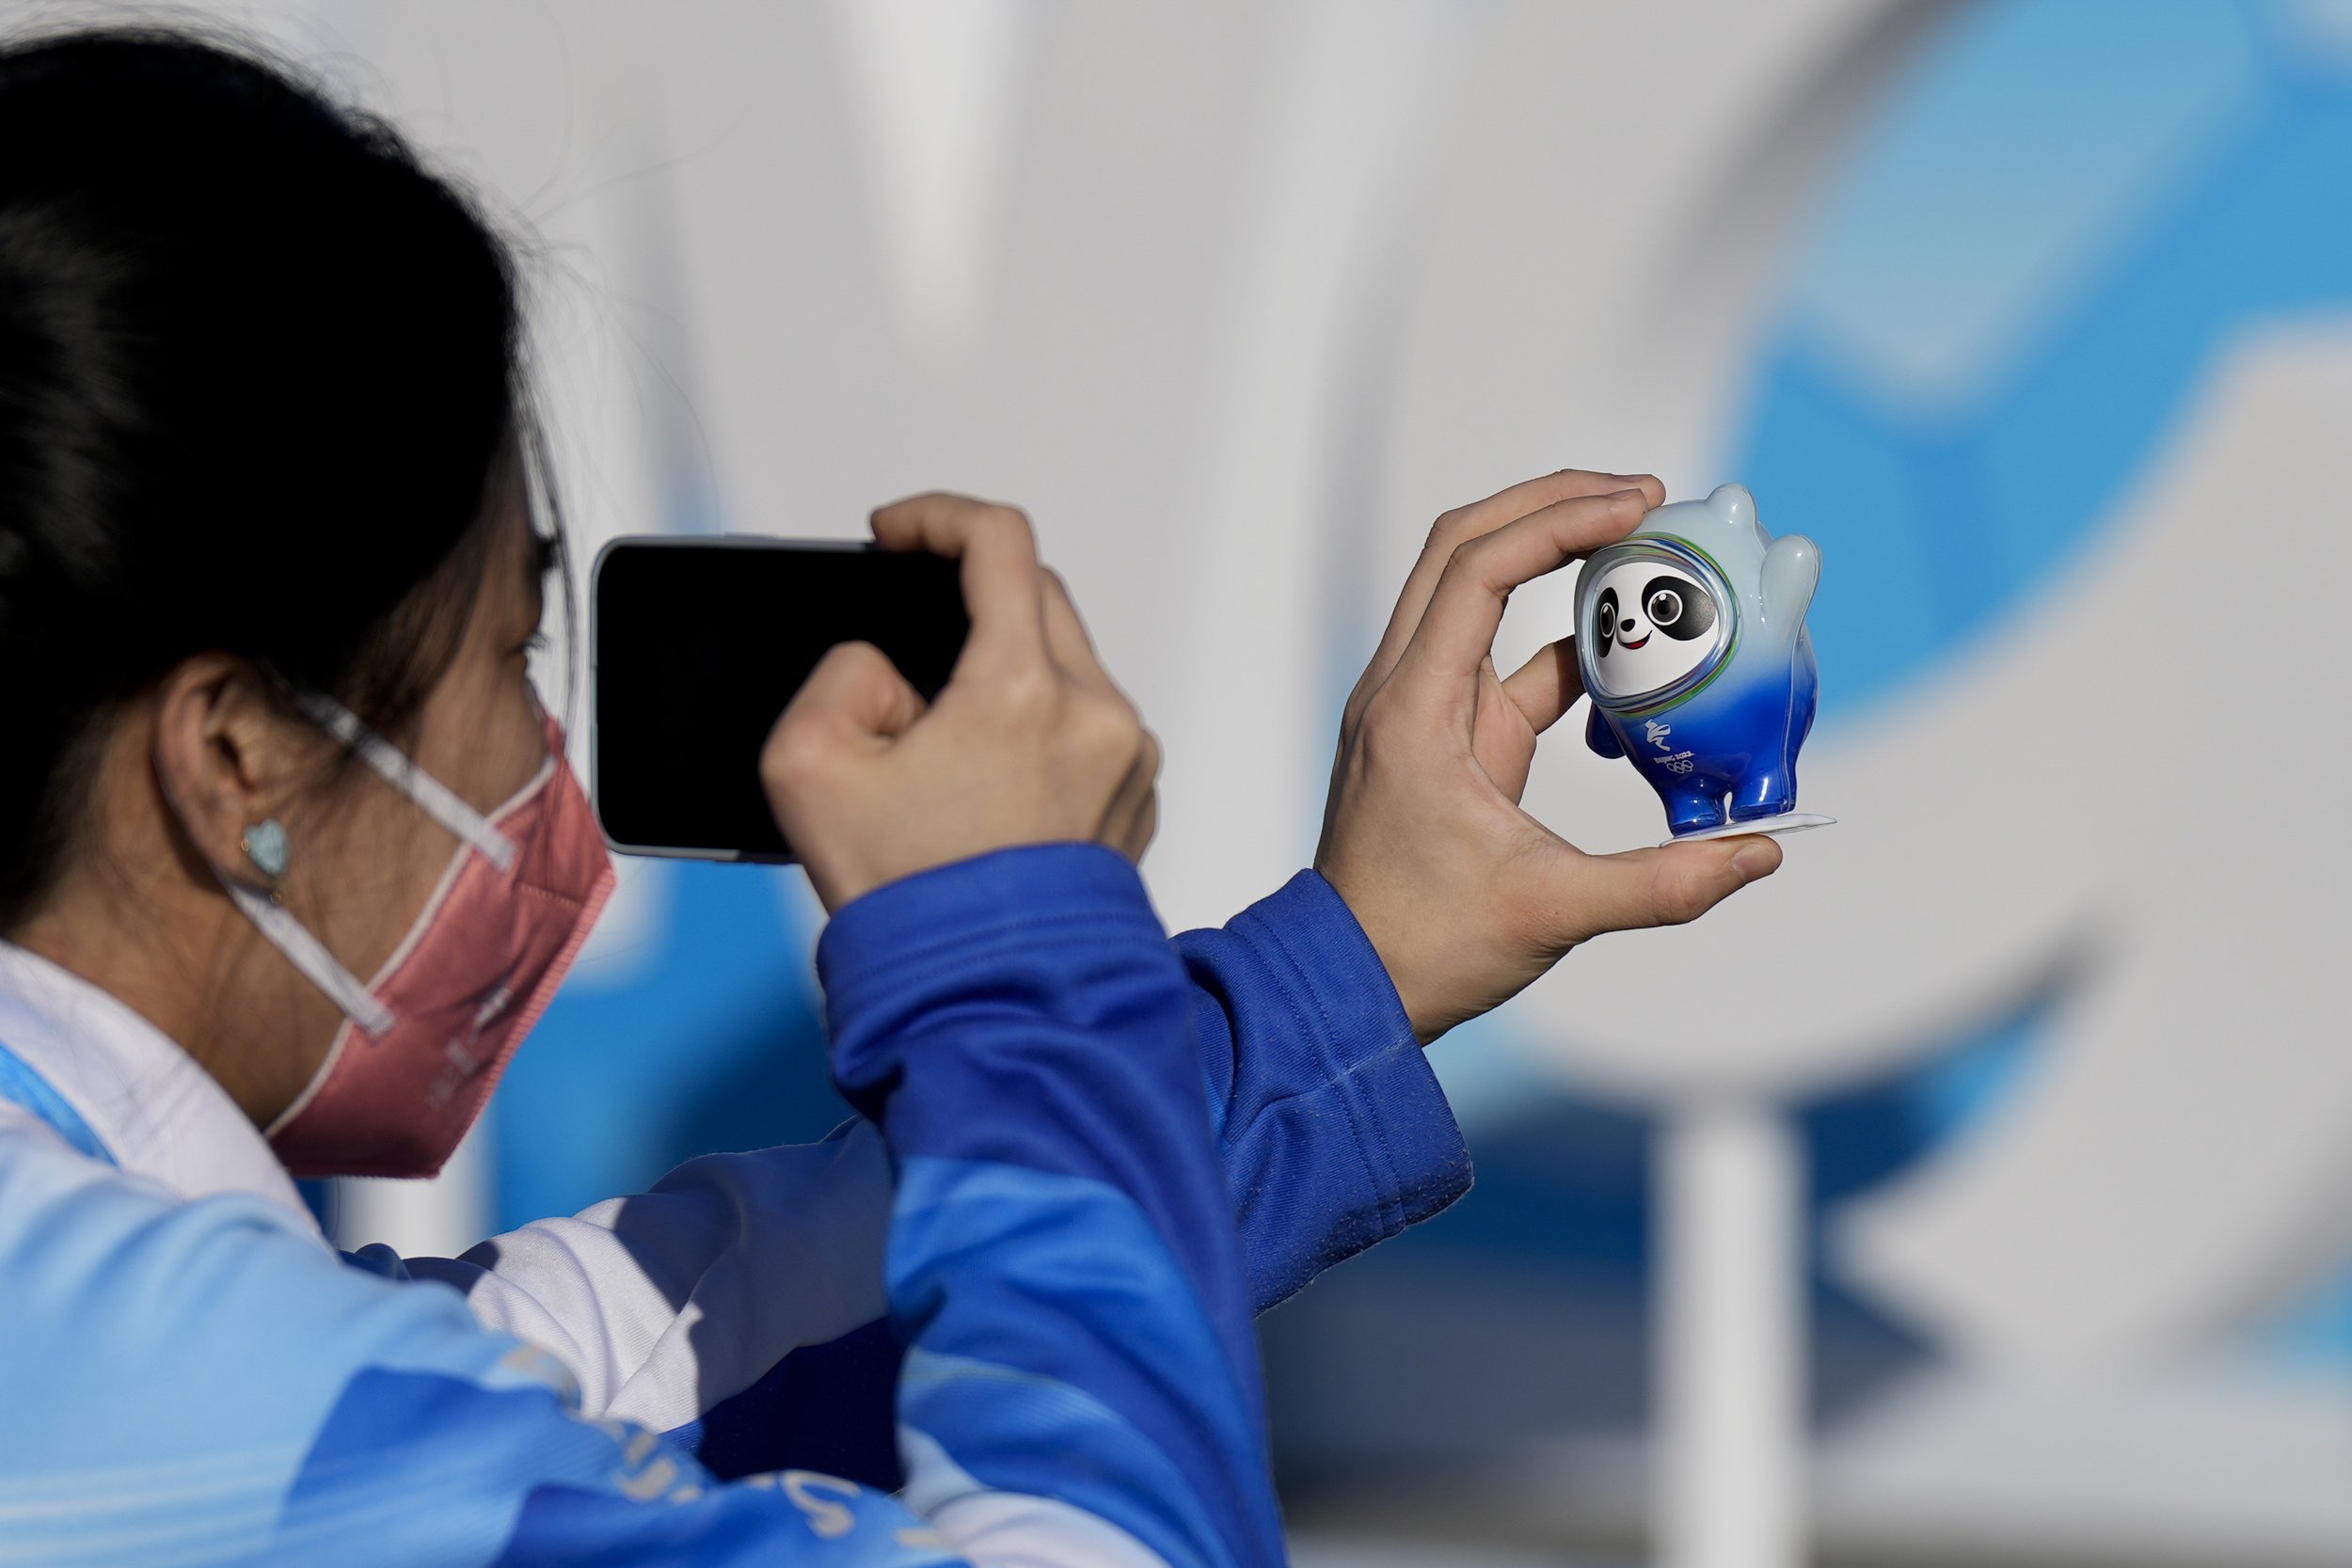  A woman takes a picture of the Olympic mascot, Bing Dwen Dwen, at the Olympic Green ahead of the 2022 Winter Olympics, Feb. 1, 2022, in Beijing. (AP Photo/Natacha Pisarenko) 